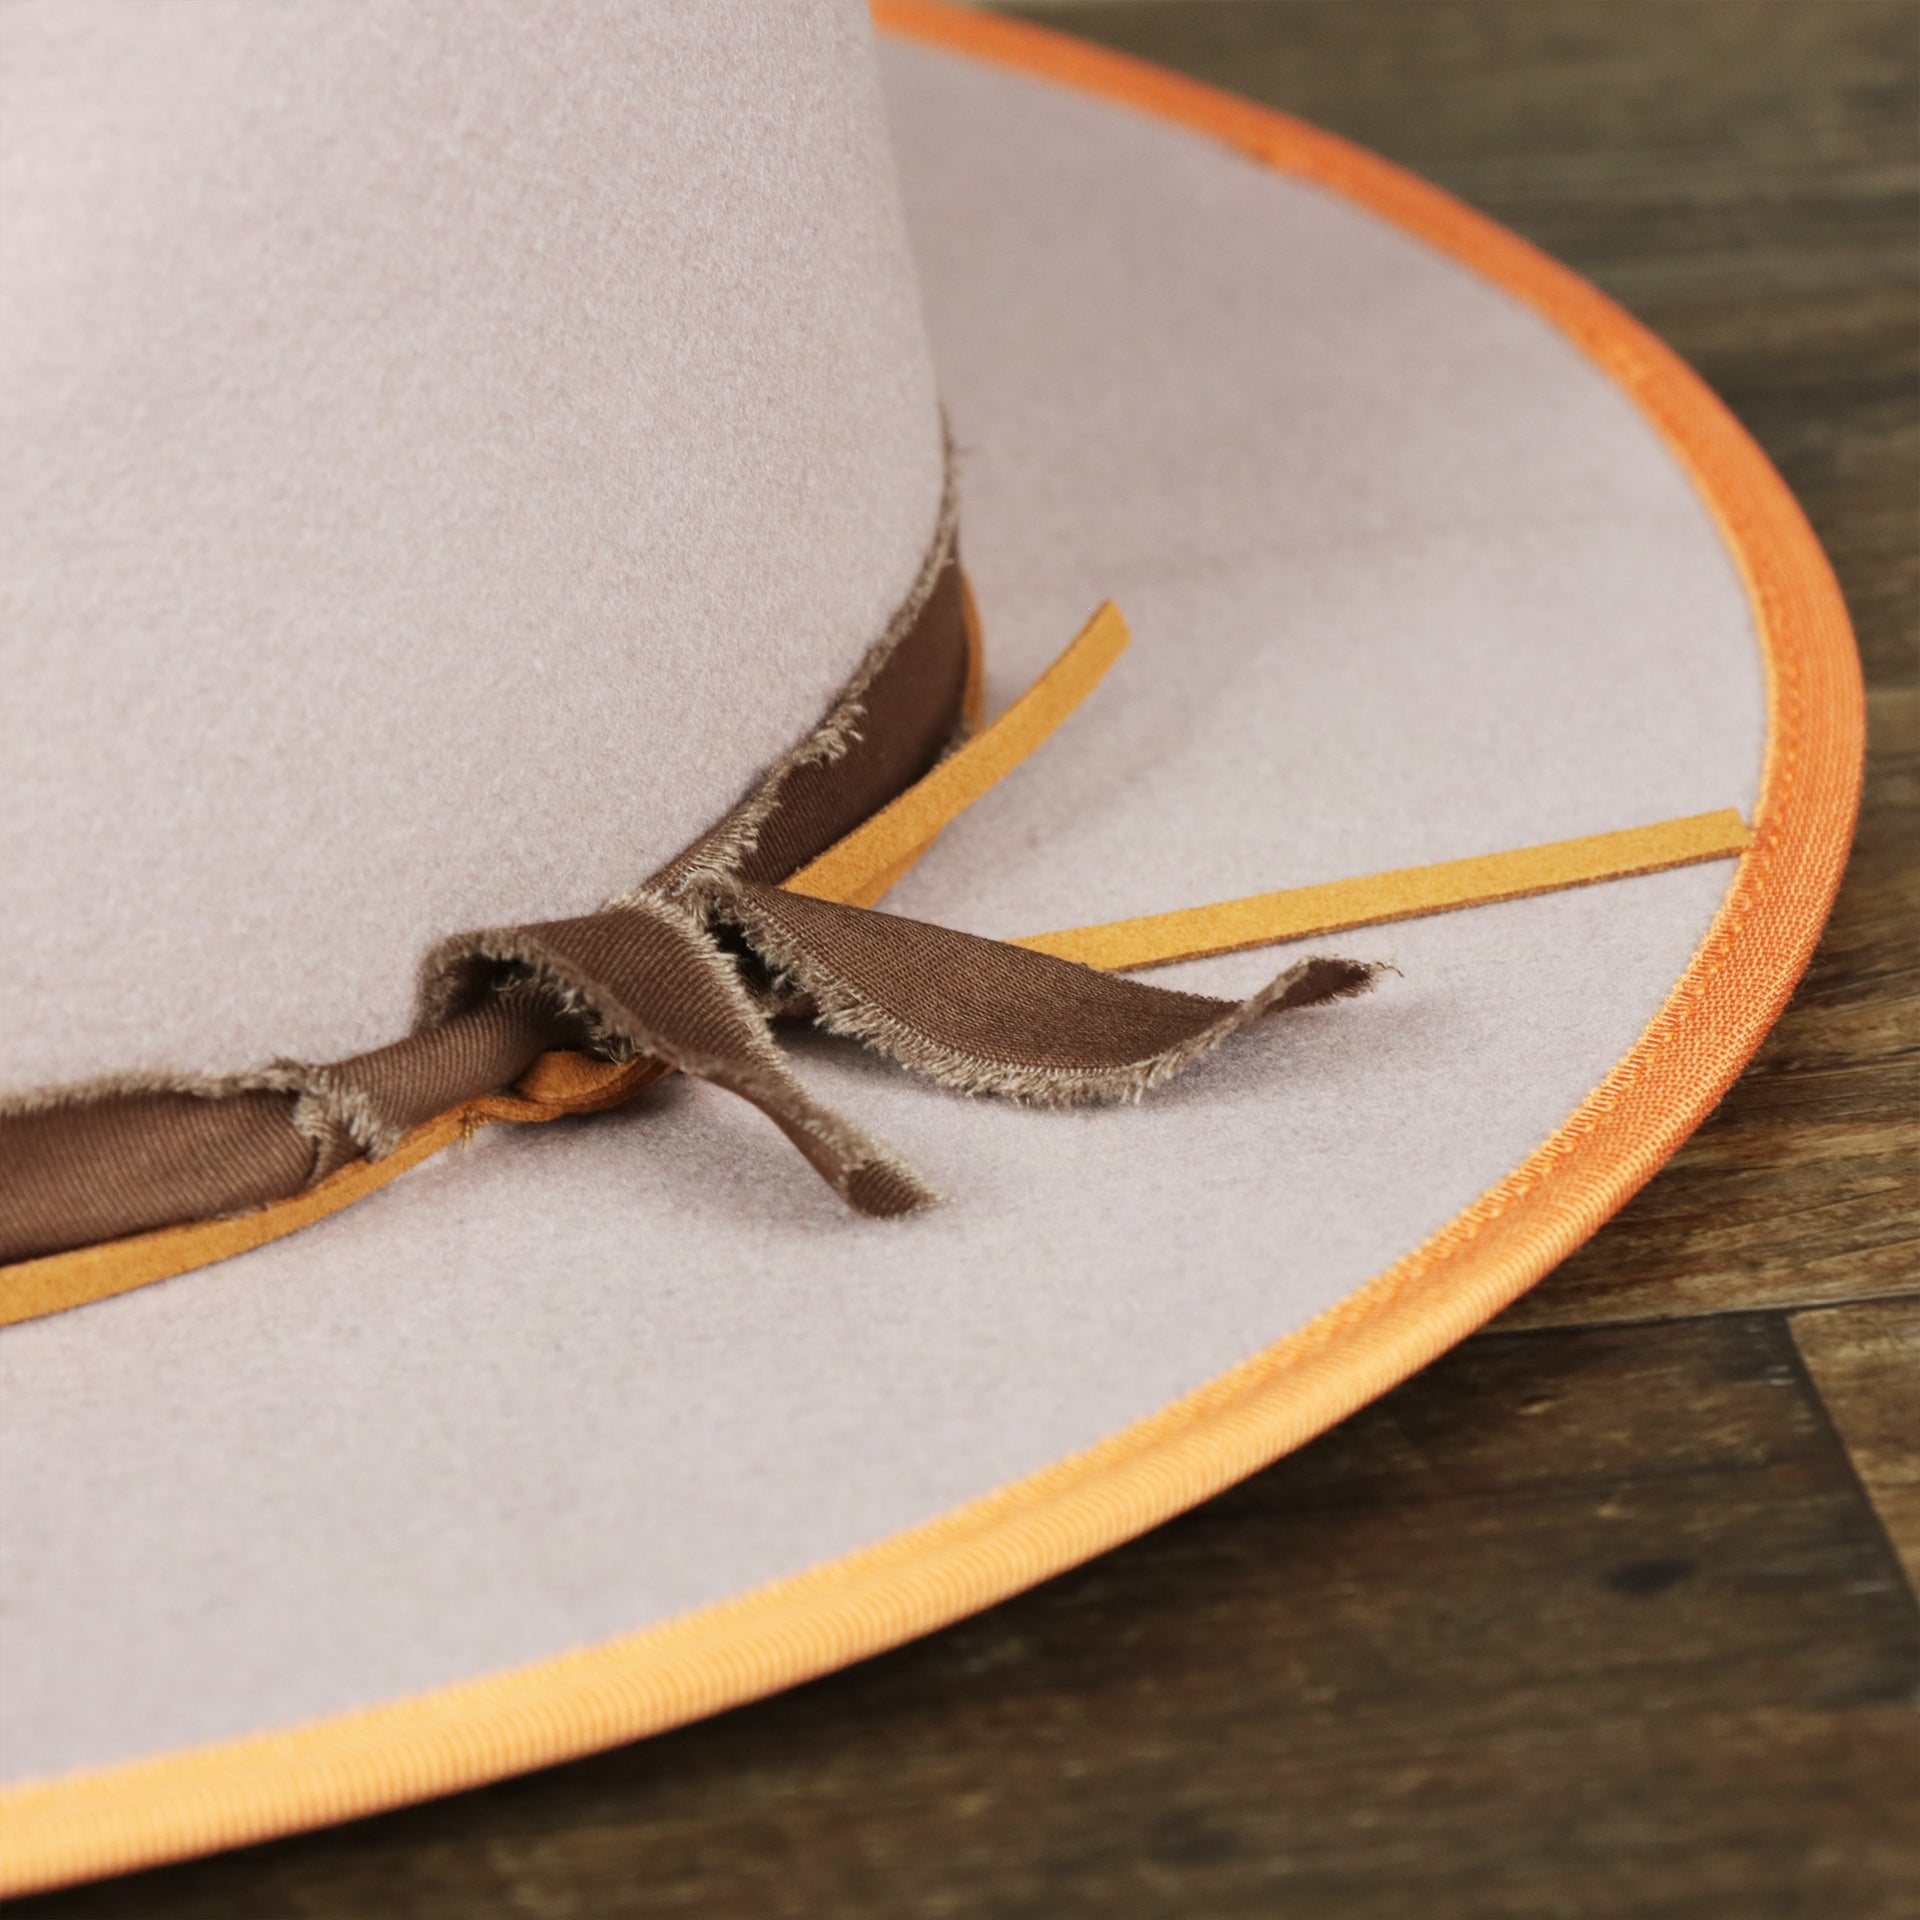 A close up of the ribbon on the Wide Brim Ribbon Trim Gray Fedora Hat with Brown Paisley Silk Interior | Zertrue 100% Australian Wool